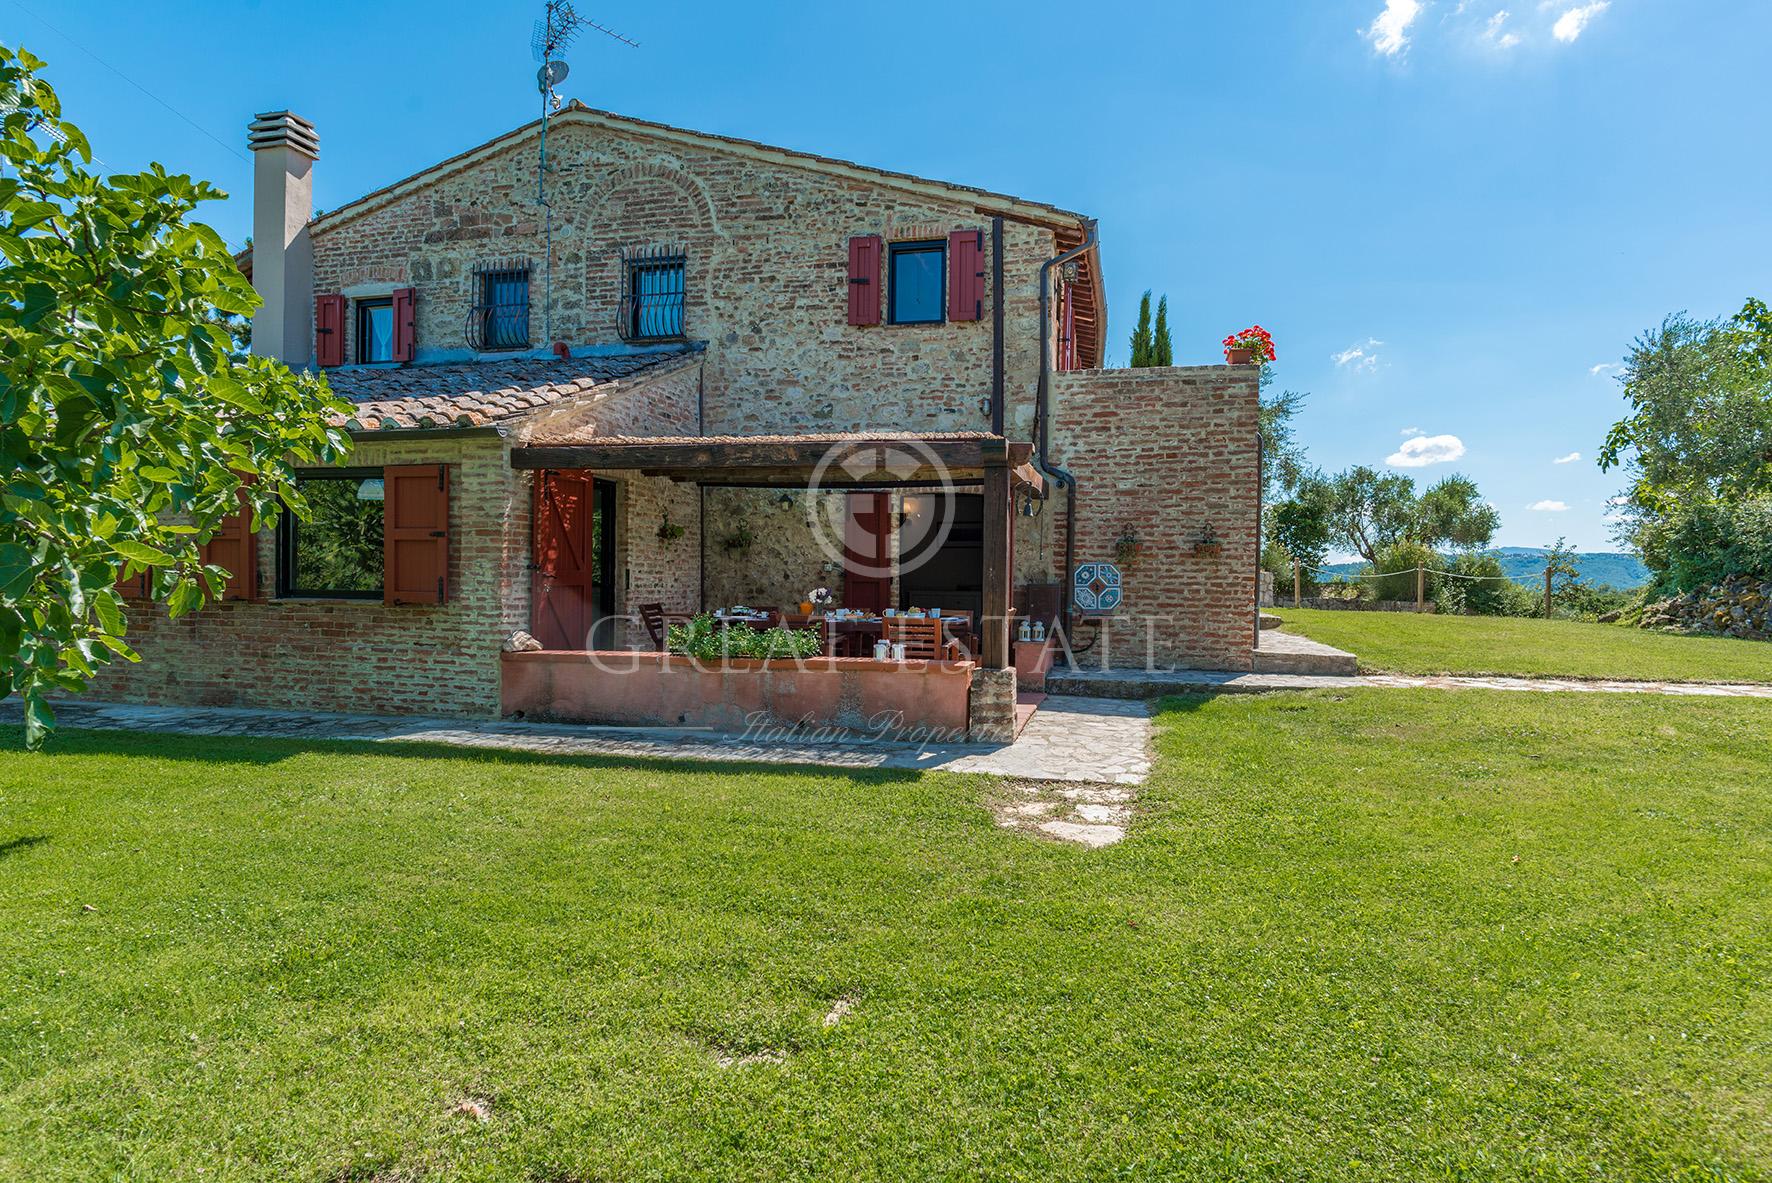 For sale cottage in  Chiusi Toscana